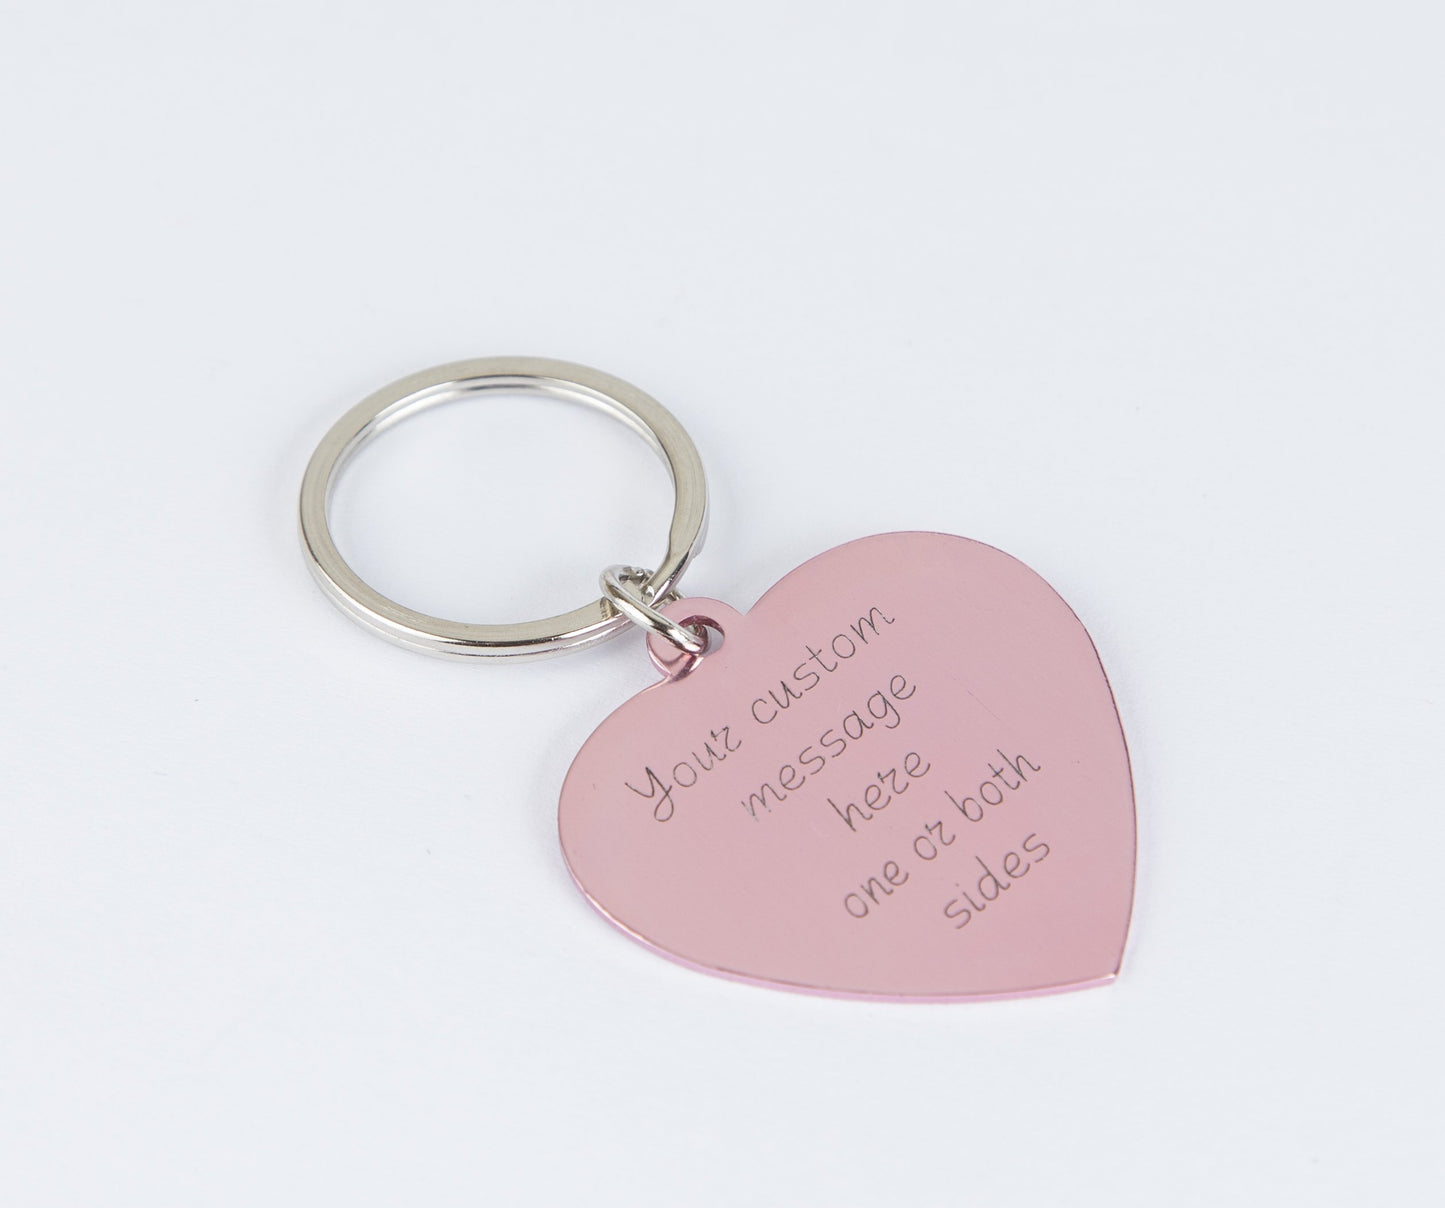 Personalized engraved pink heart keychain Custom gift girlfriend BFF